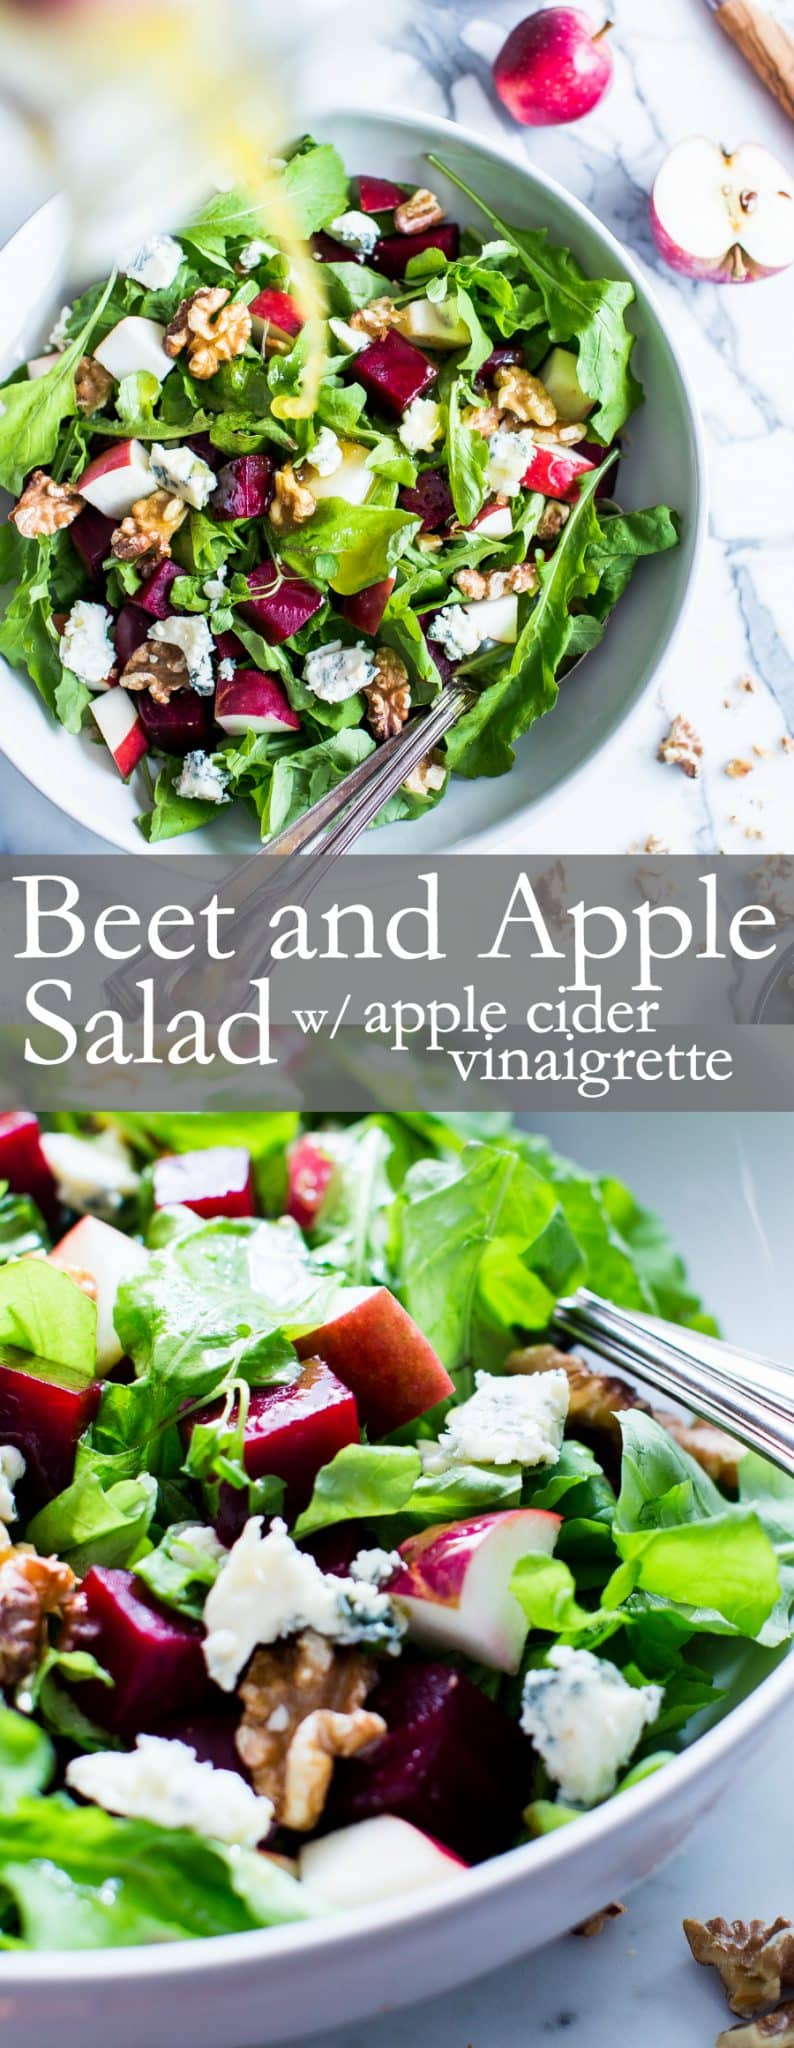 Pinterest pin for beet and apple salad. 